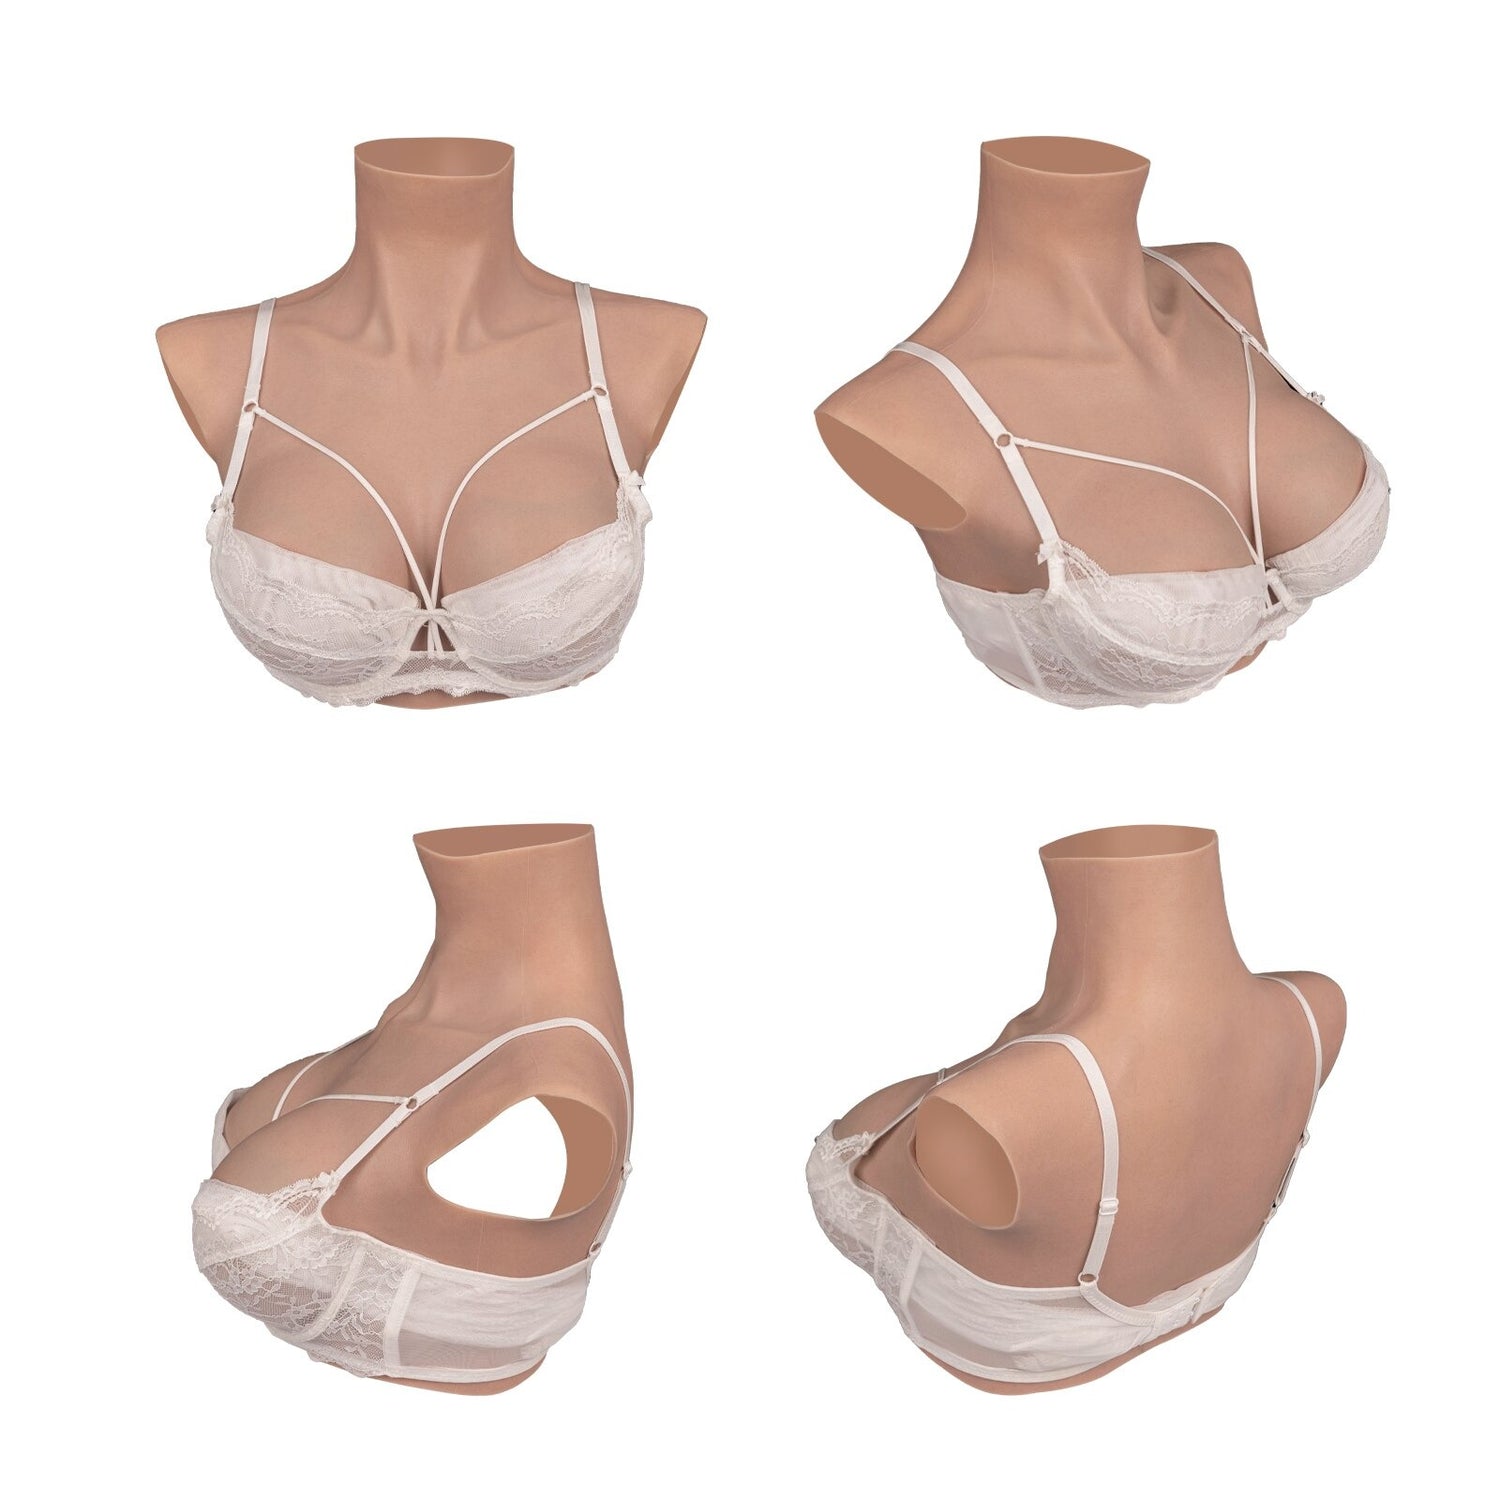 Breast Form Accessories // 6 Products